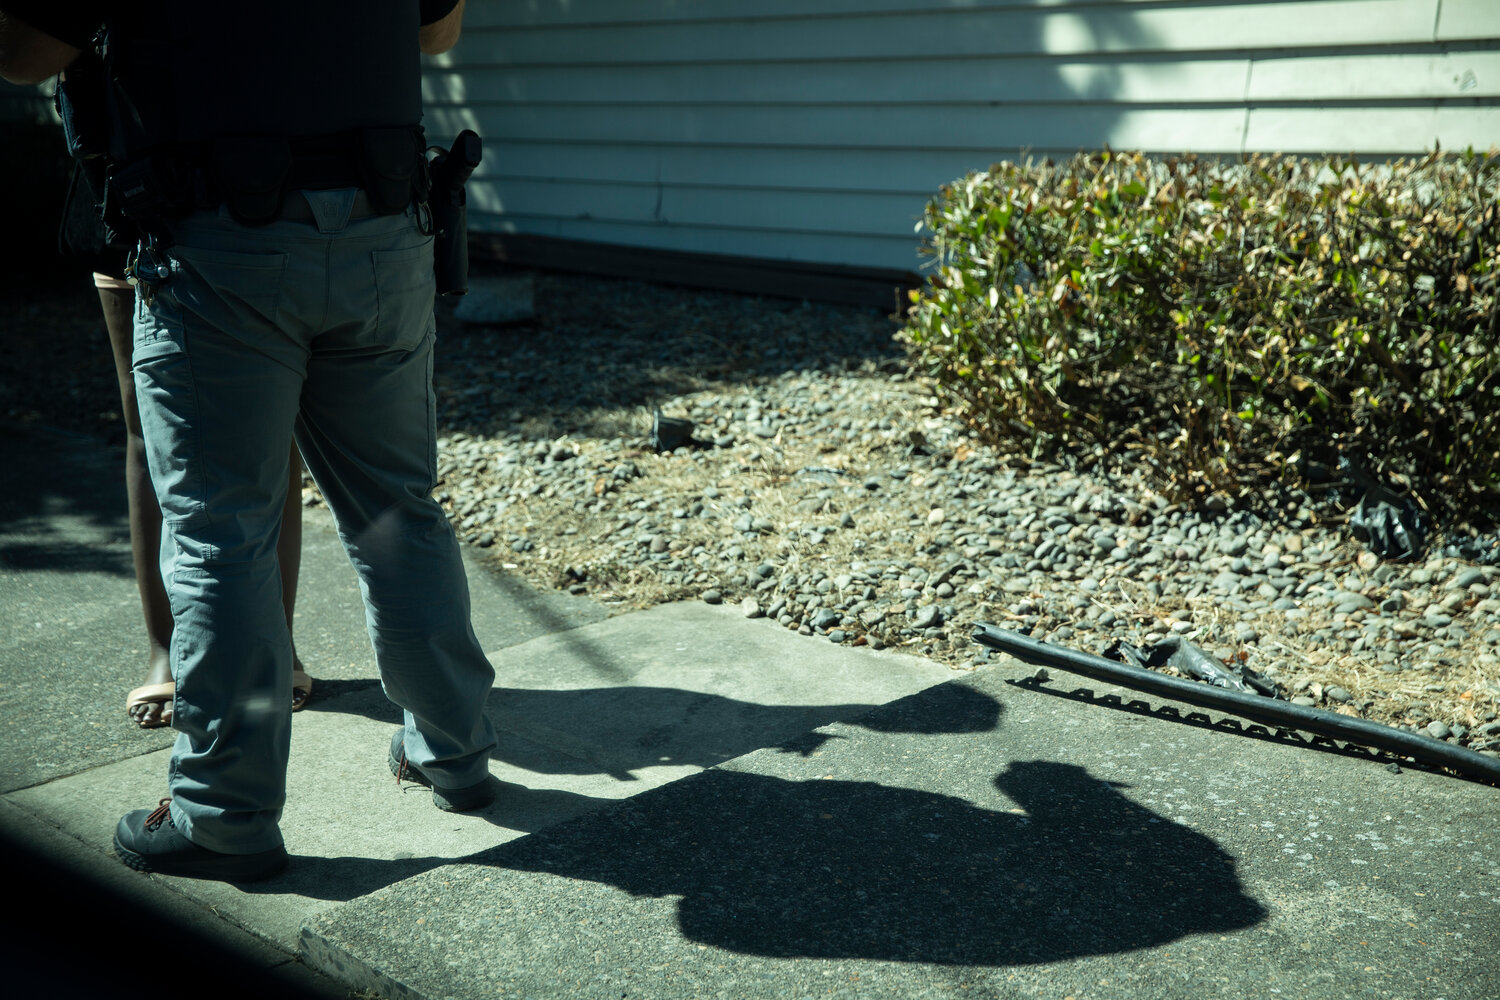 Detective Tim Larsen, a member of the Portland Police Bureau’s Human Trafficking Unit, gathers information from an adult who he suspects is a victim of sex trafficking during a directed patrol mission in July. Larsen says many adult trafficking victims were first trafficked as minors. (Moriah Ratner/InvestigateWest)